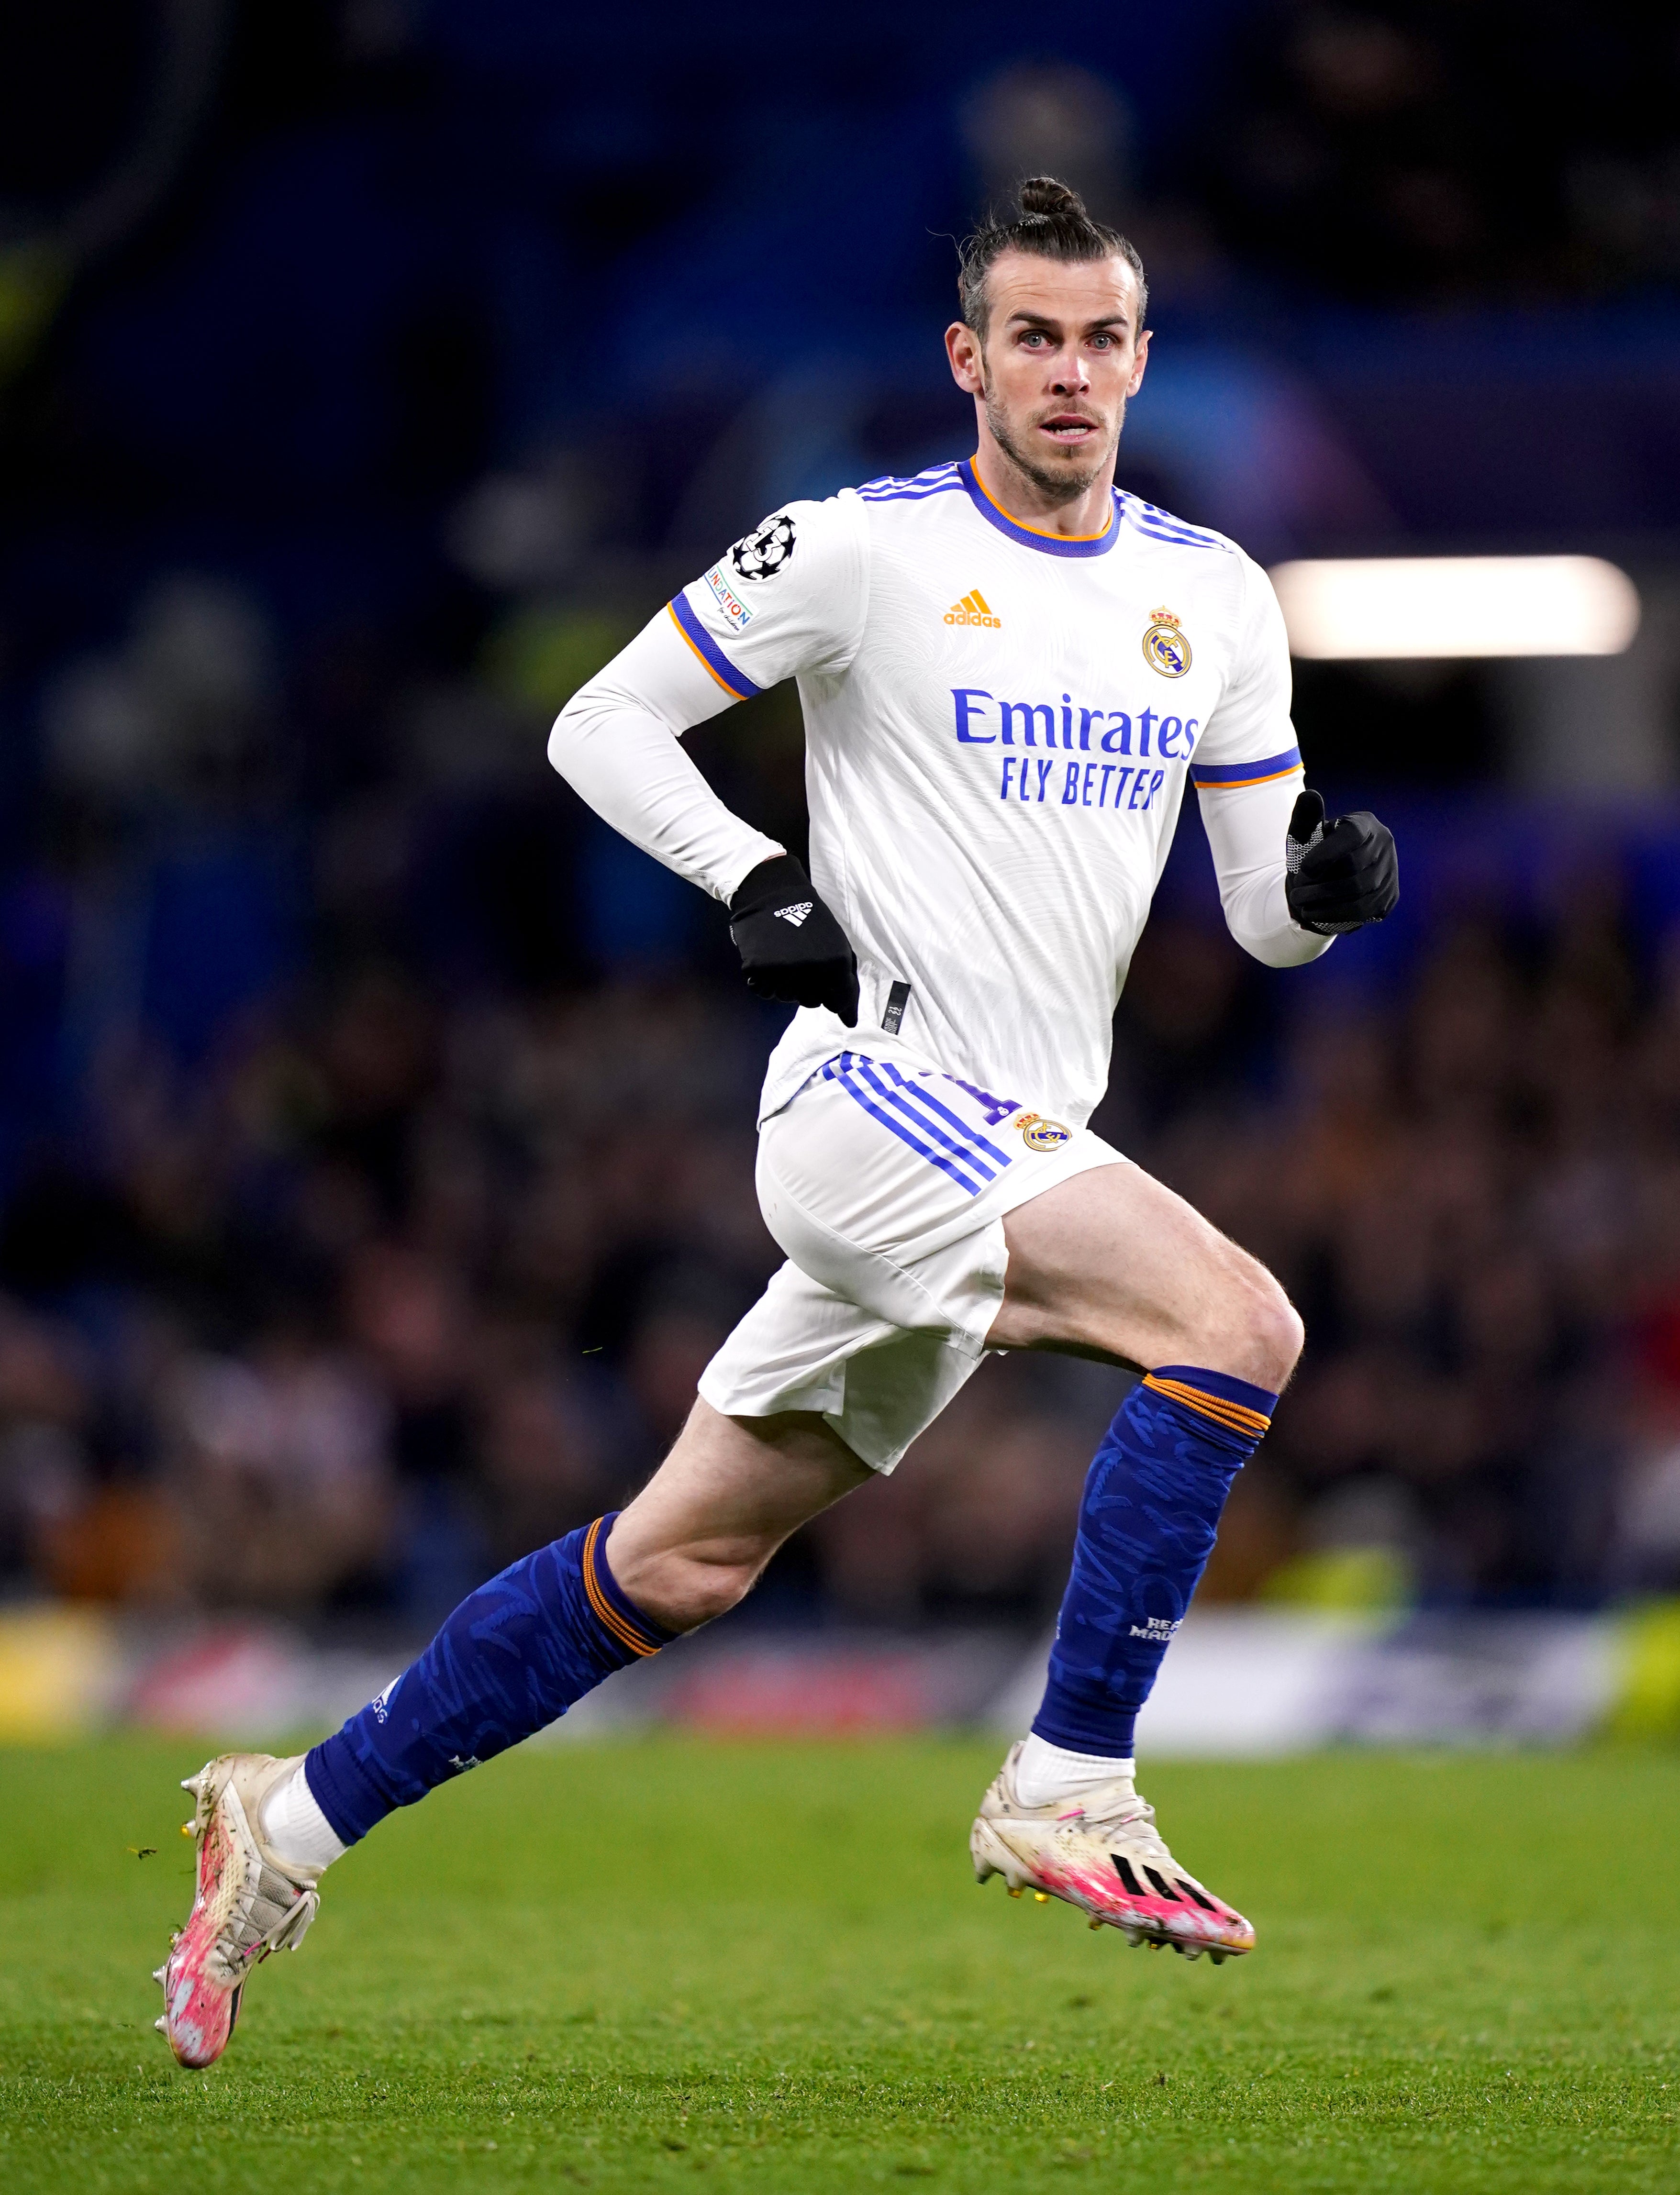 Los Angeles FC: The franchise that has added another star by signing Gareth  Bale